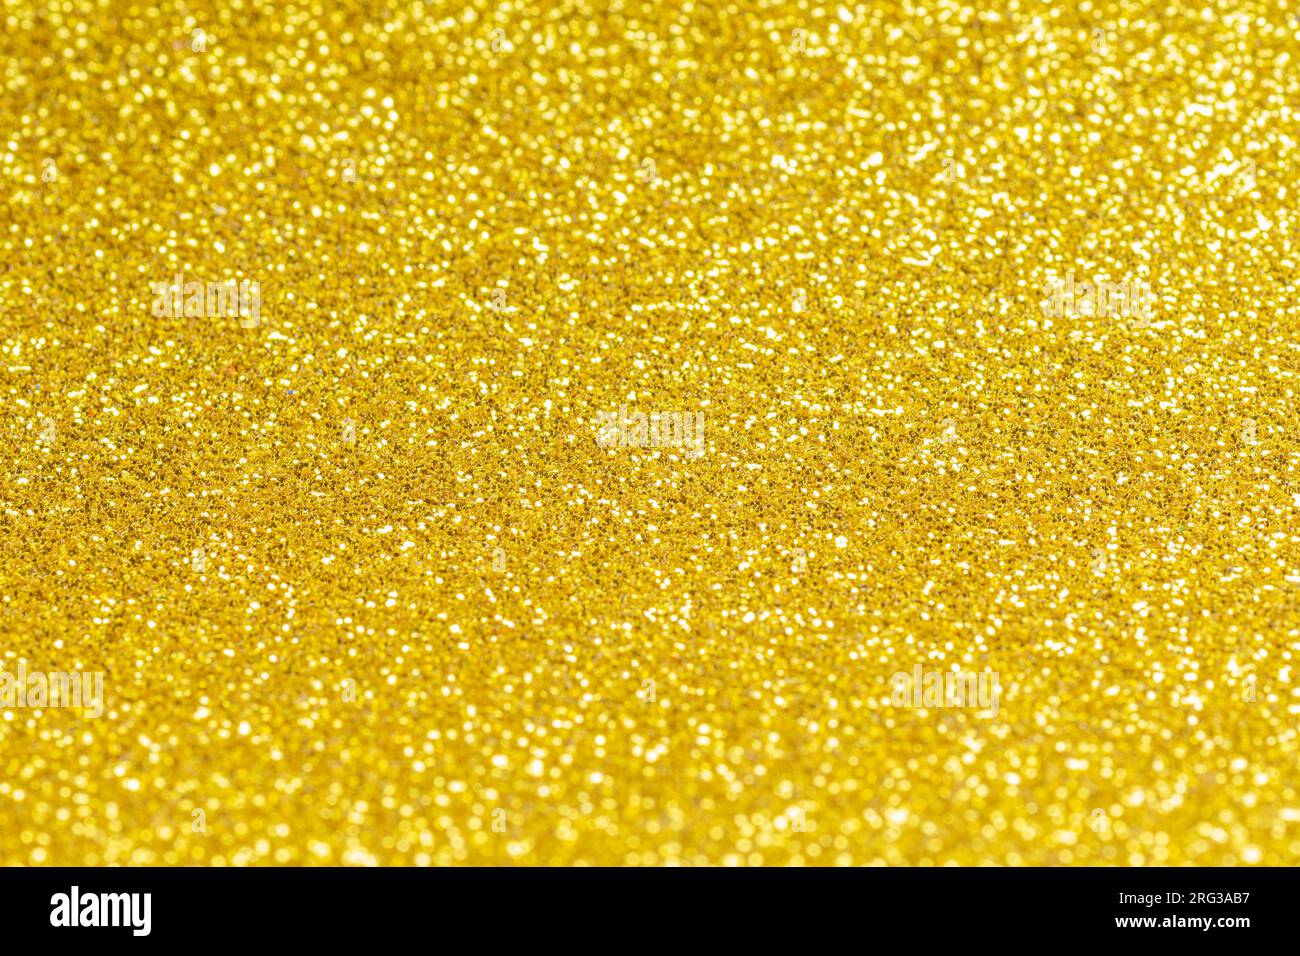 New Glitter Texture Holiday Background In Stylish Black Tone Stock Photo -  Download Image Now - iStock